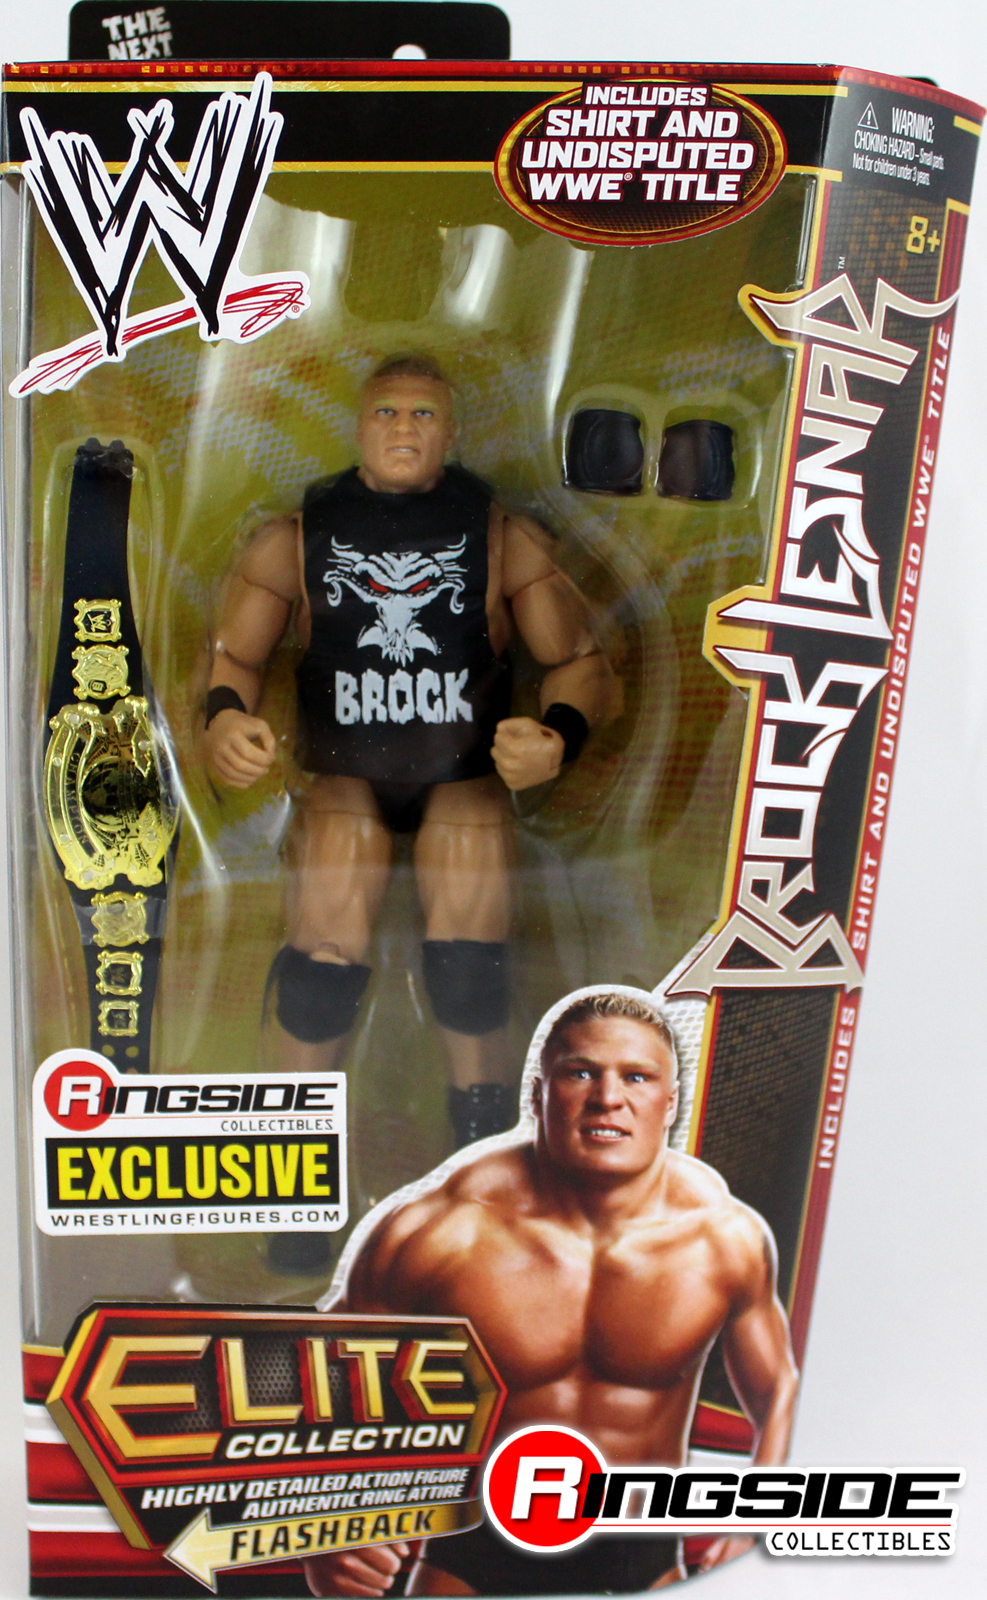 ringside collectibles